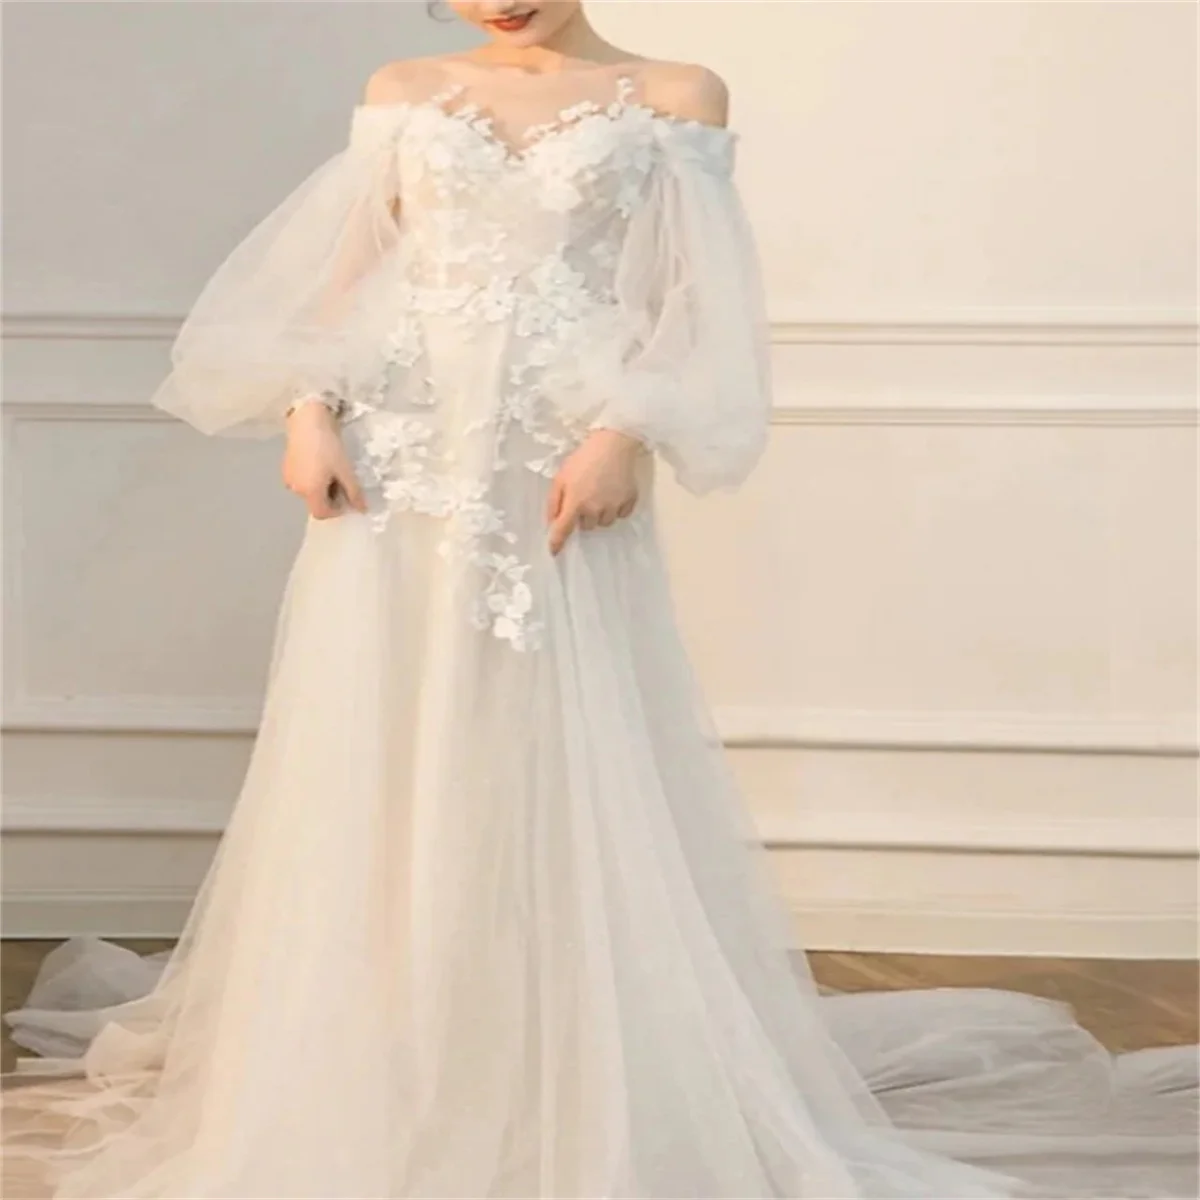 

Bridal Gowns Hall Sheath / Column Wedding Dresses Vintage Romantic Long Sleeve Illusion Neck Lace With Pleats Appliques 2023 New